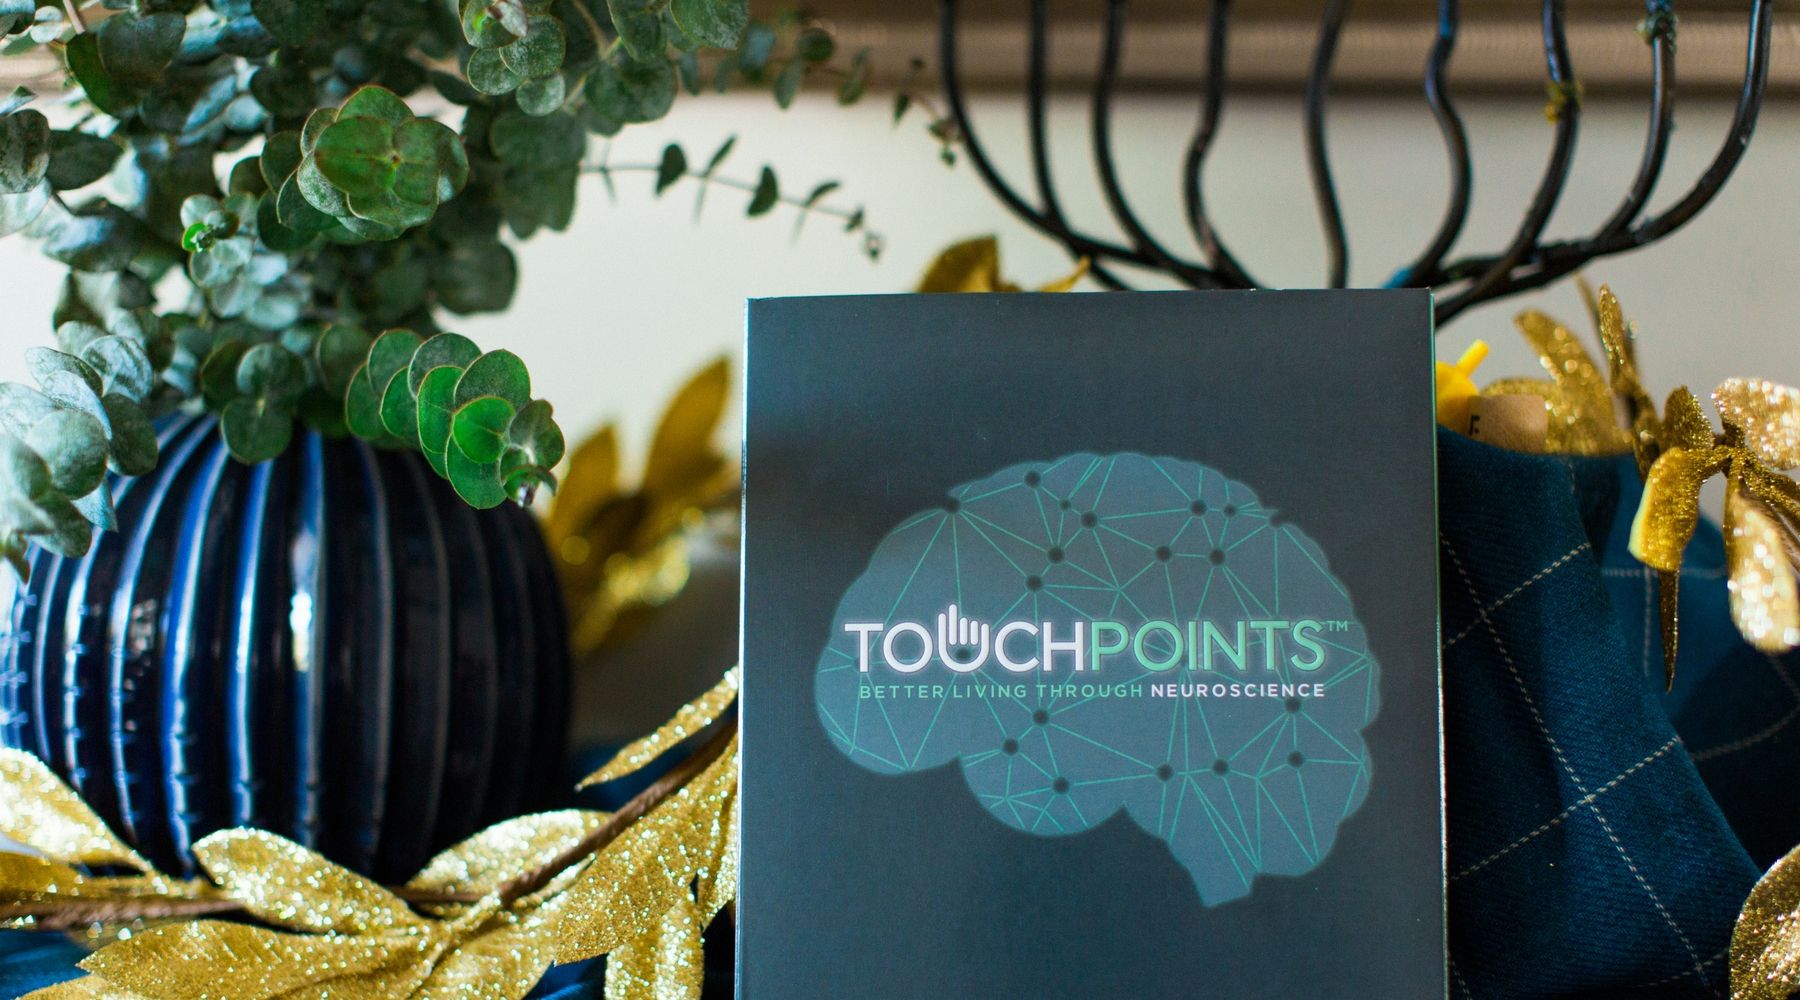 TouchPoints™ are the hottest gift of the season!